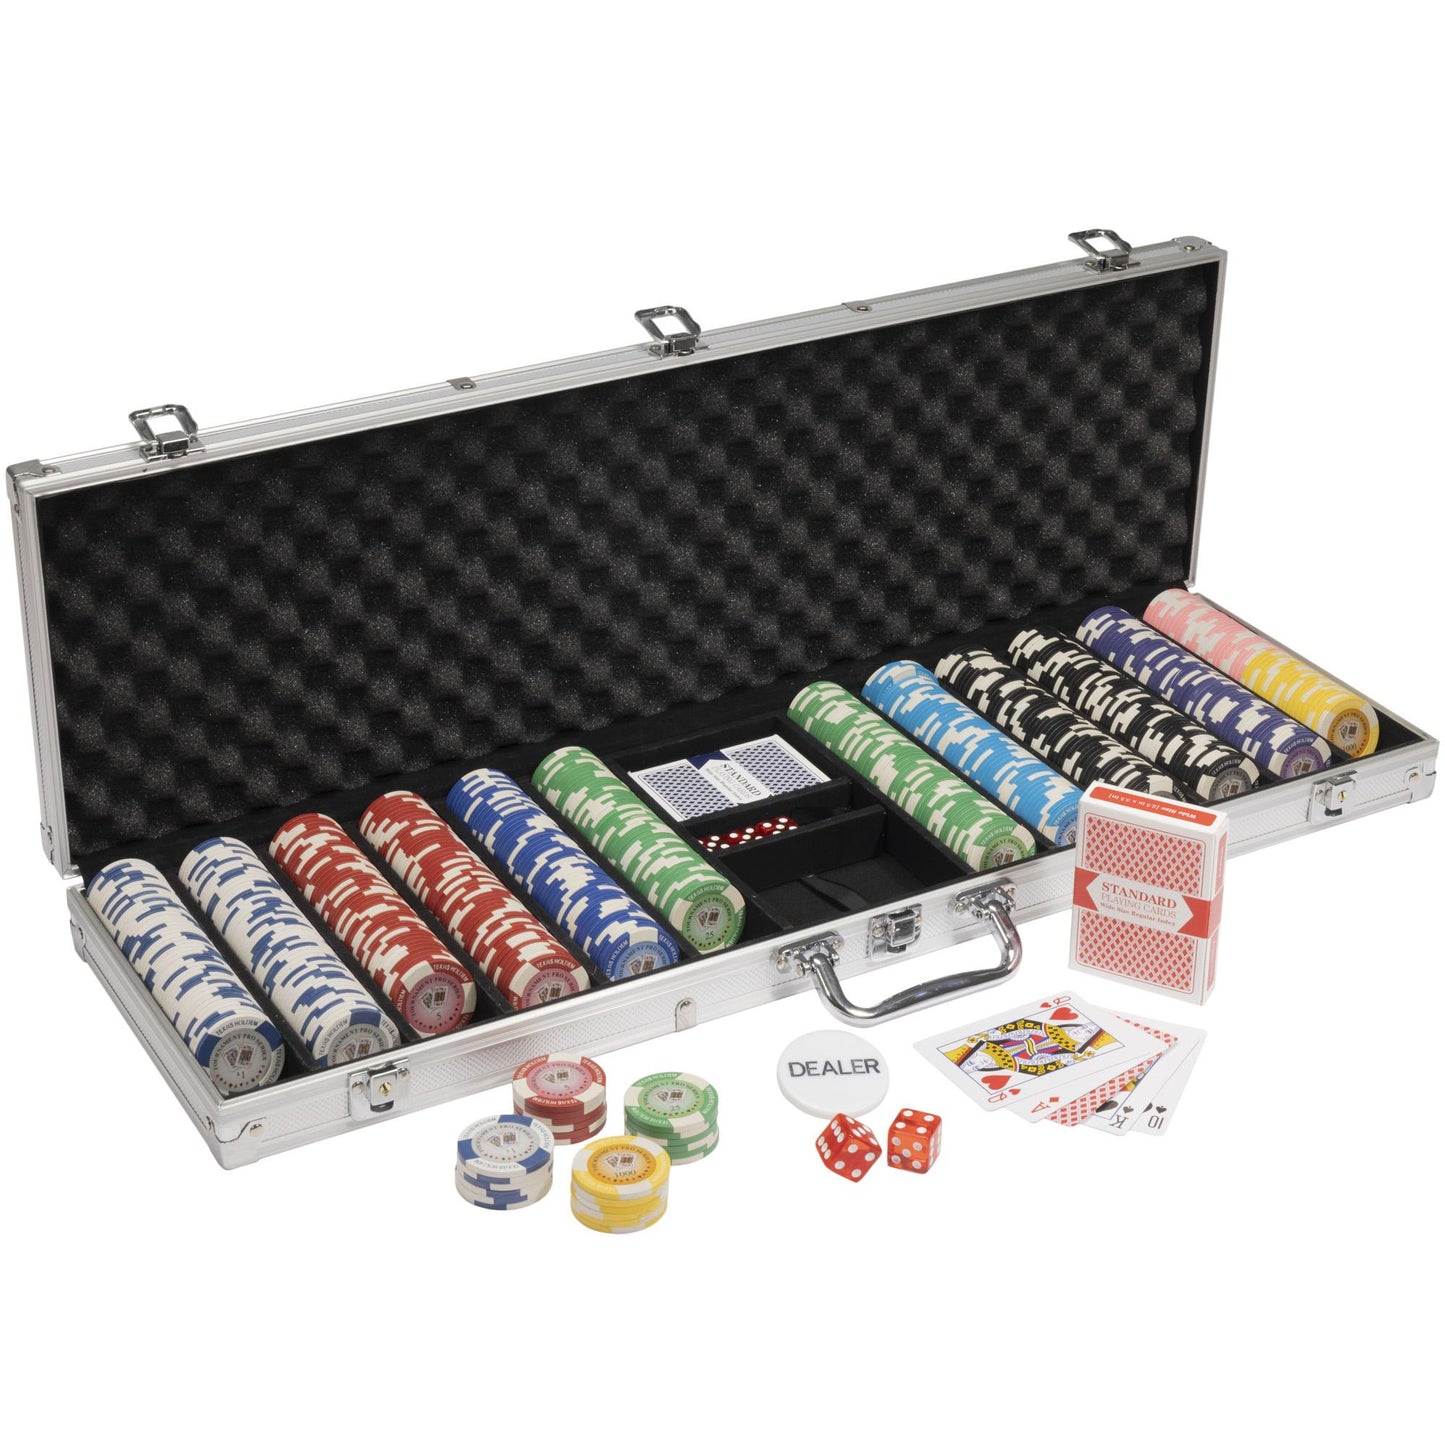 600 Tournament Pro Poker Chips with Aluminum Case